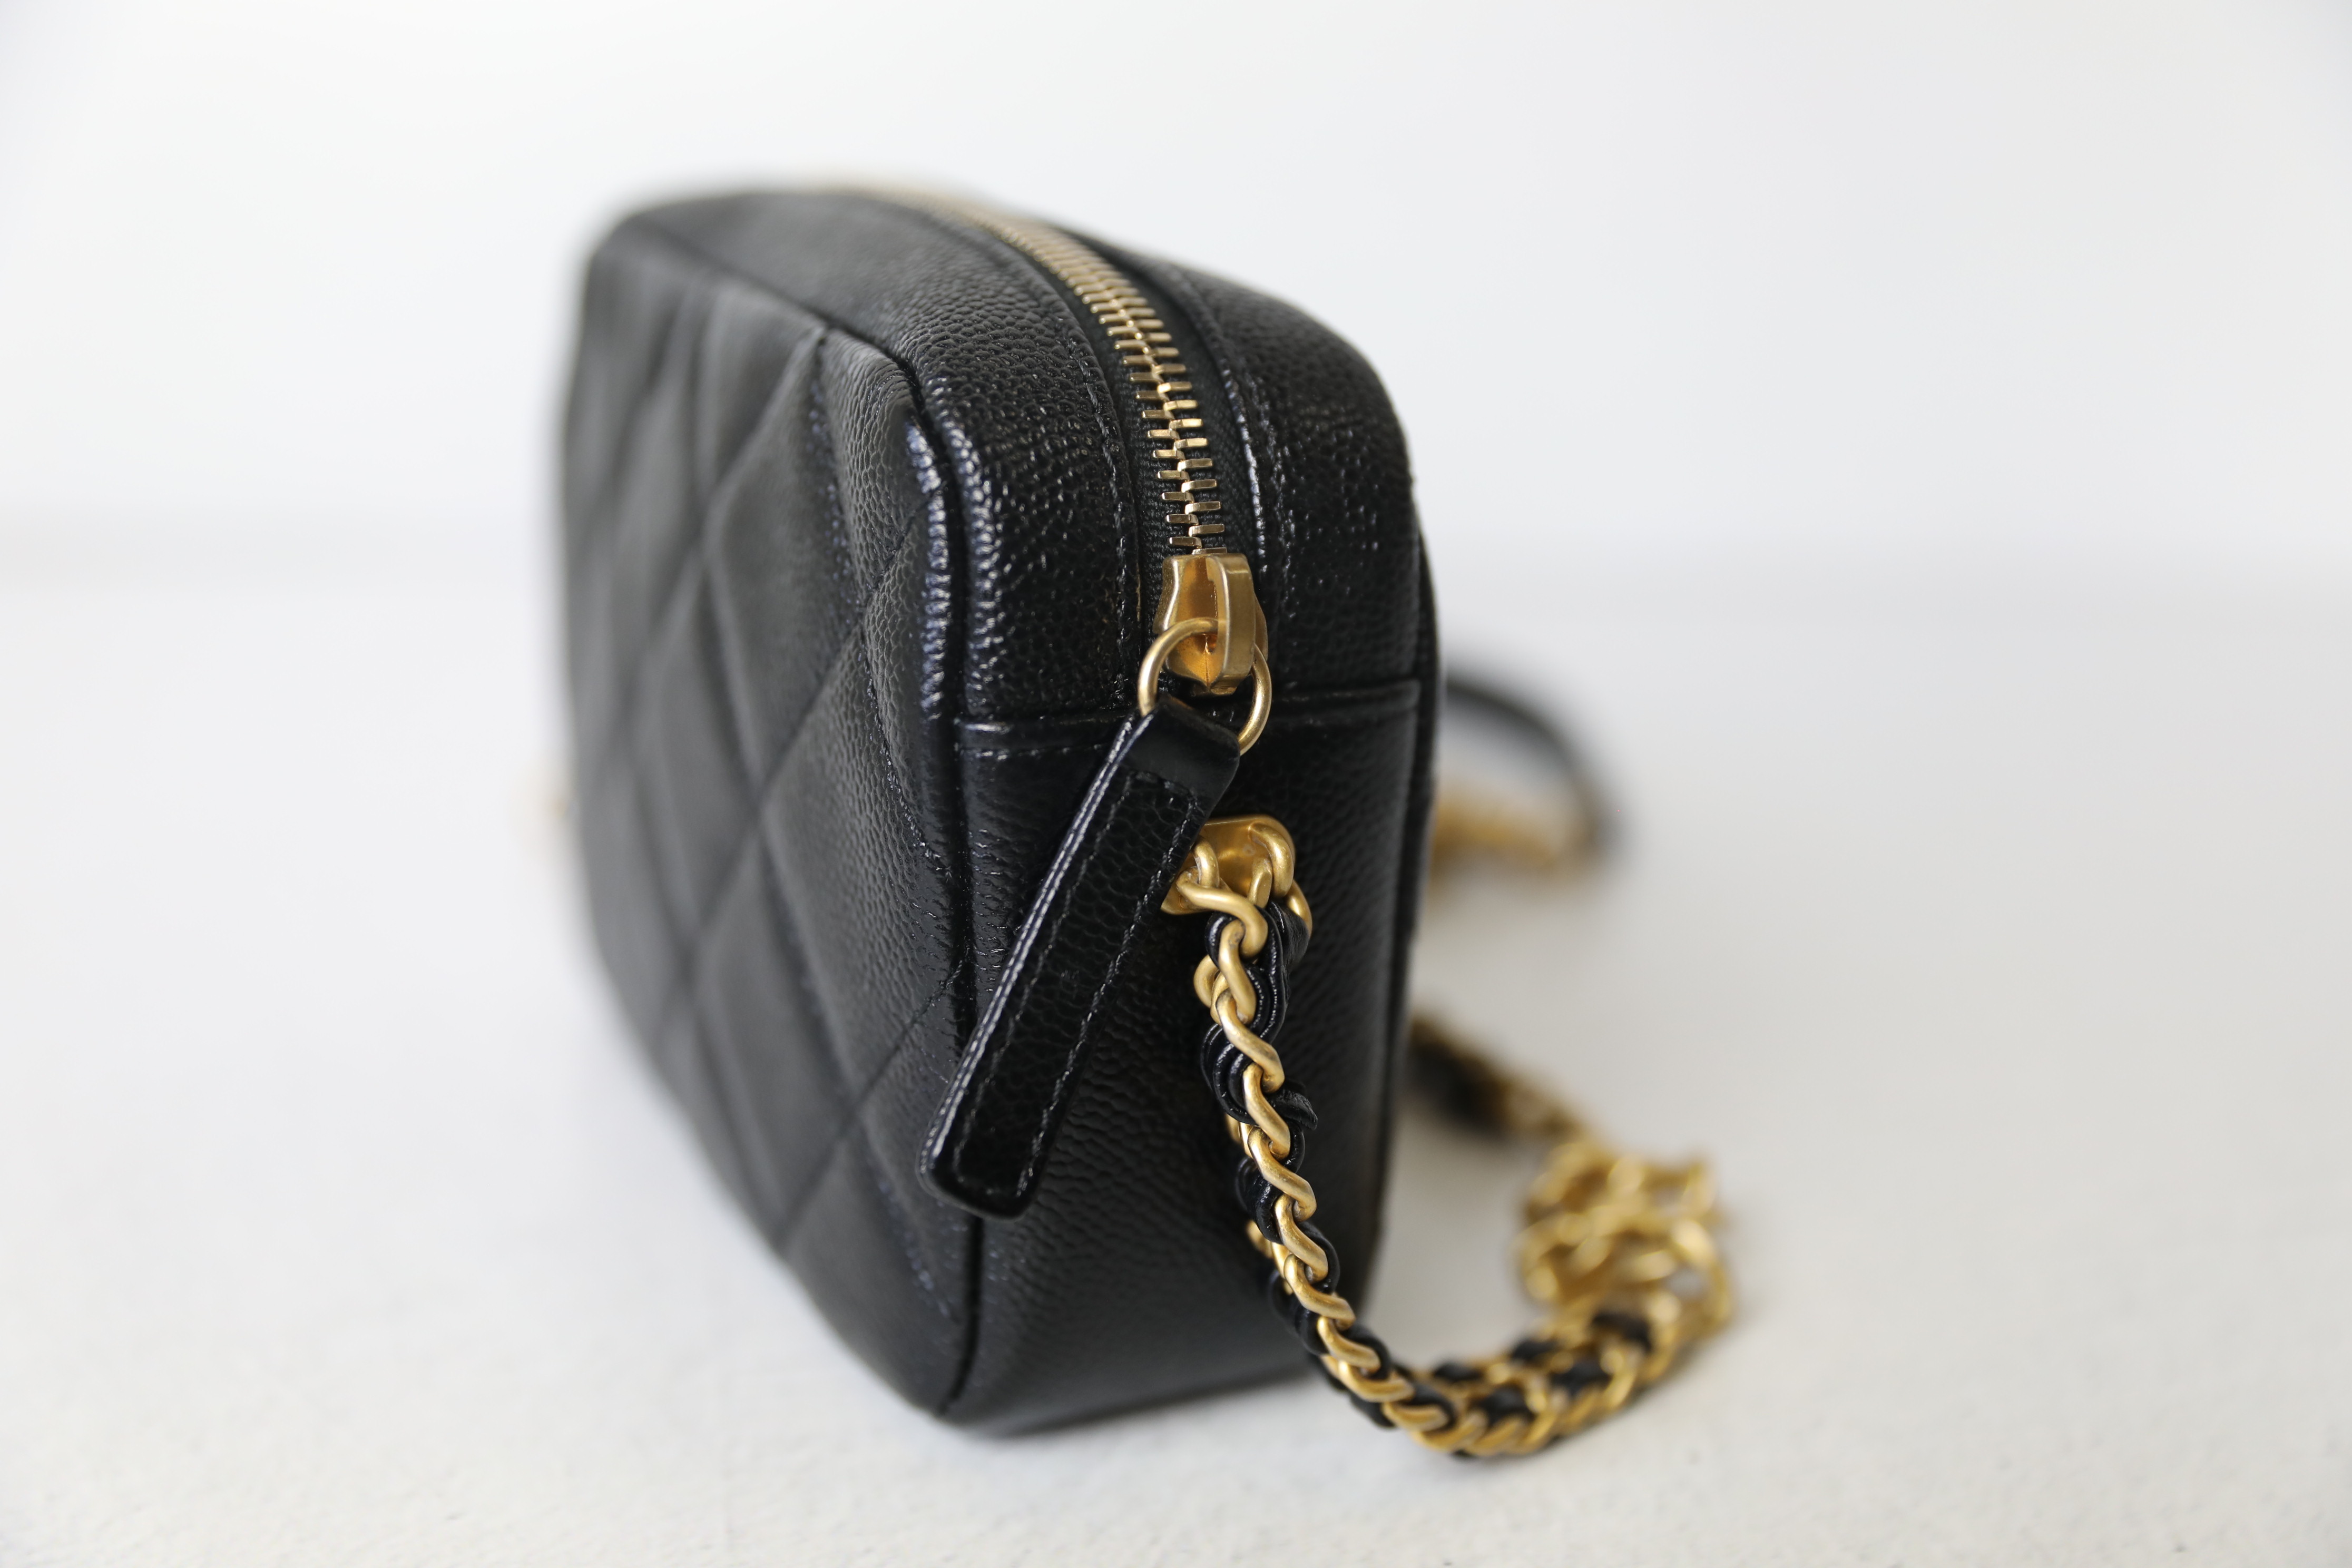 CHANEL Shiny Caviar Quilted Chain Melody Camera Bag Black 1238580